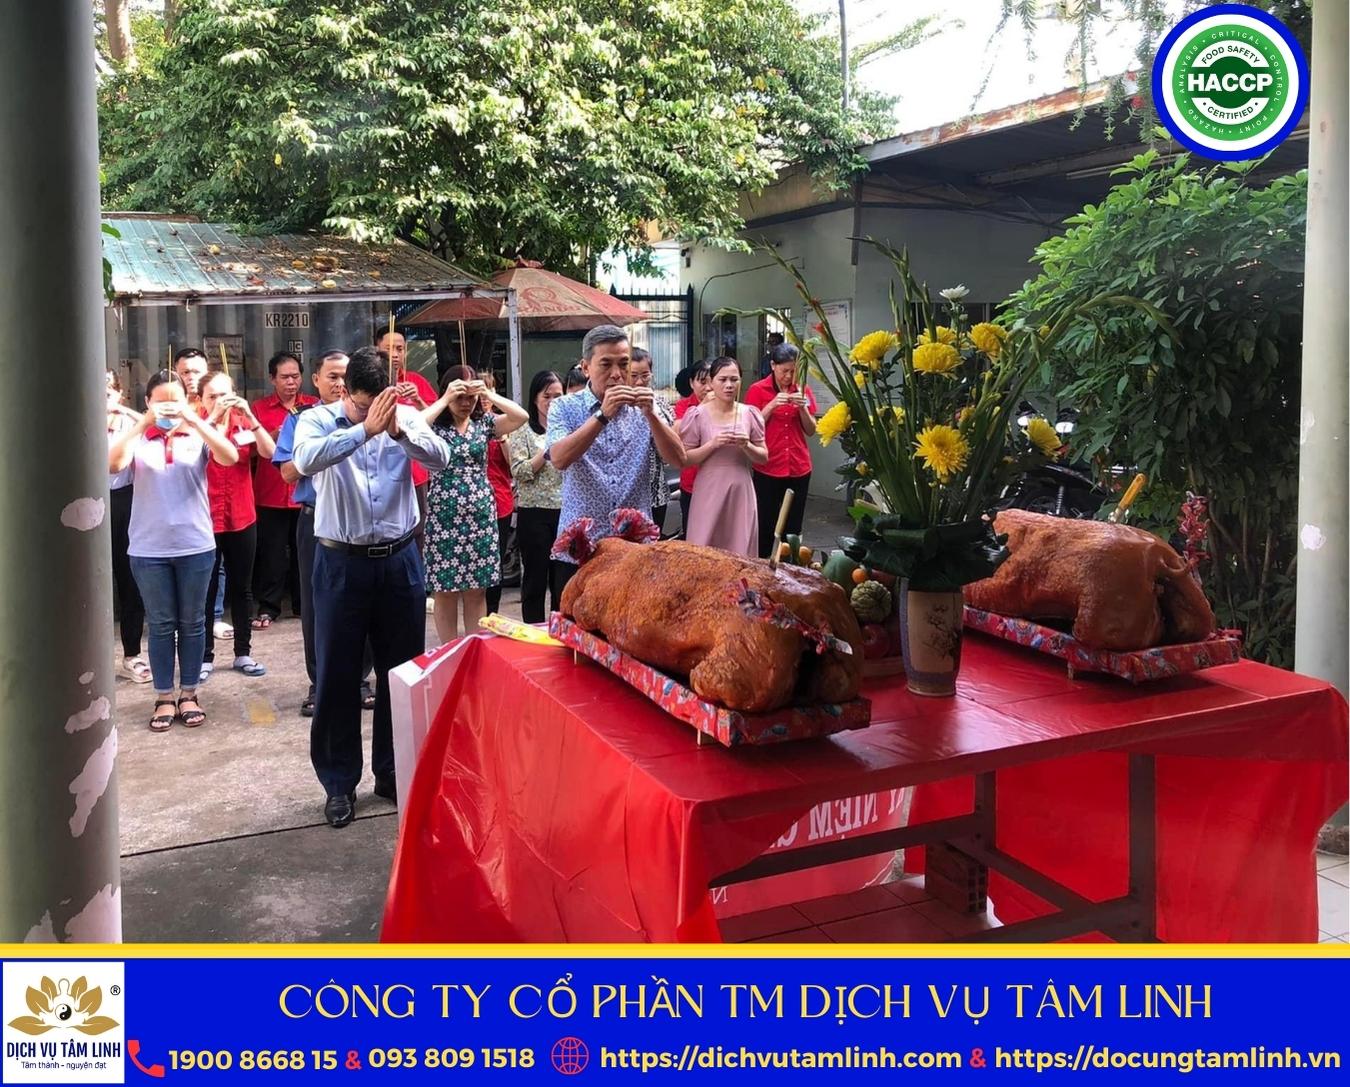 mam-cung-gio-to-nghe-may-day-du-va-nguon-goc-le-gio-to-nghe-may-12-12-am-lich